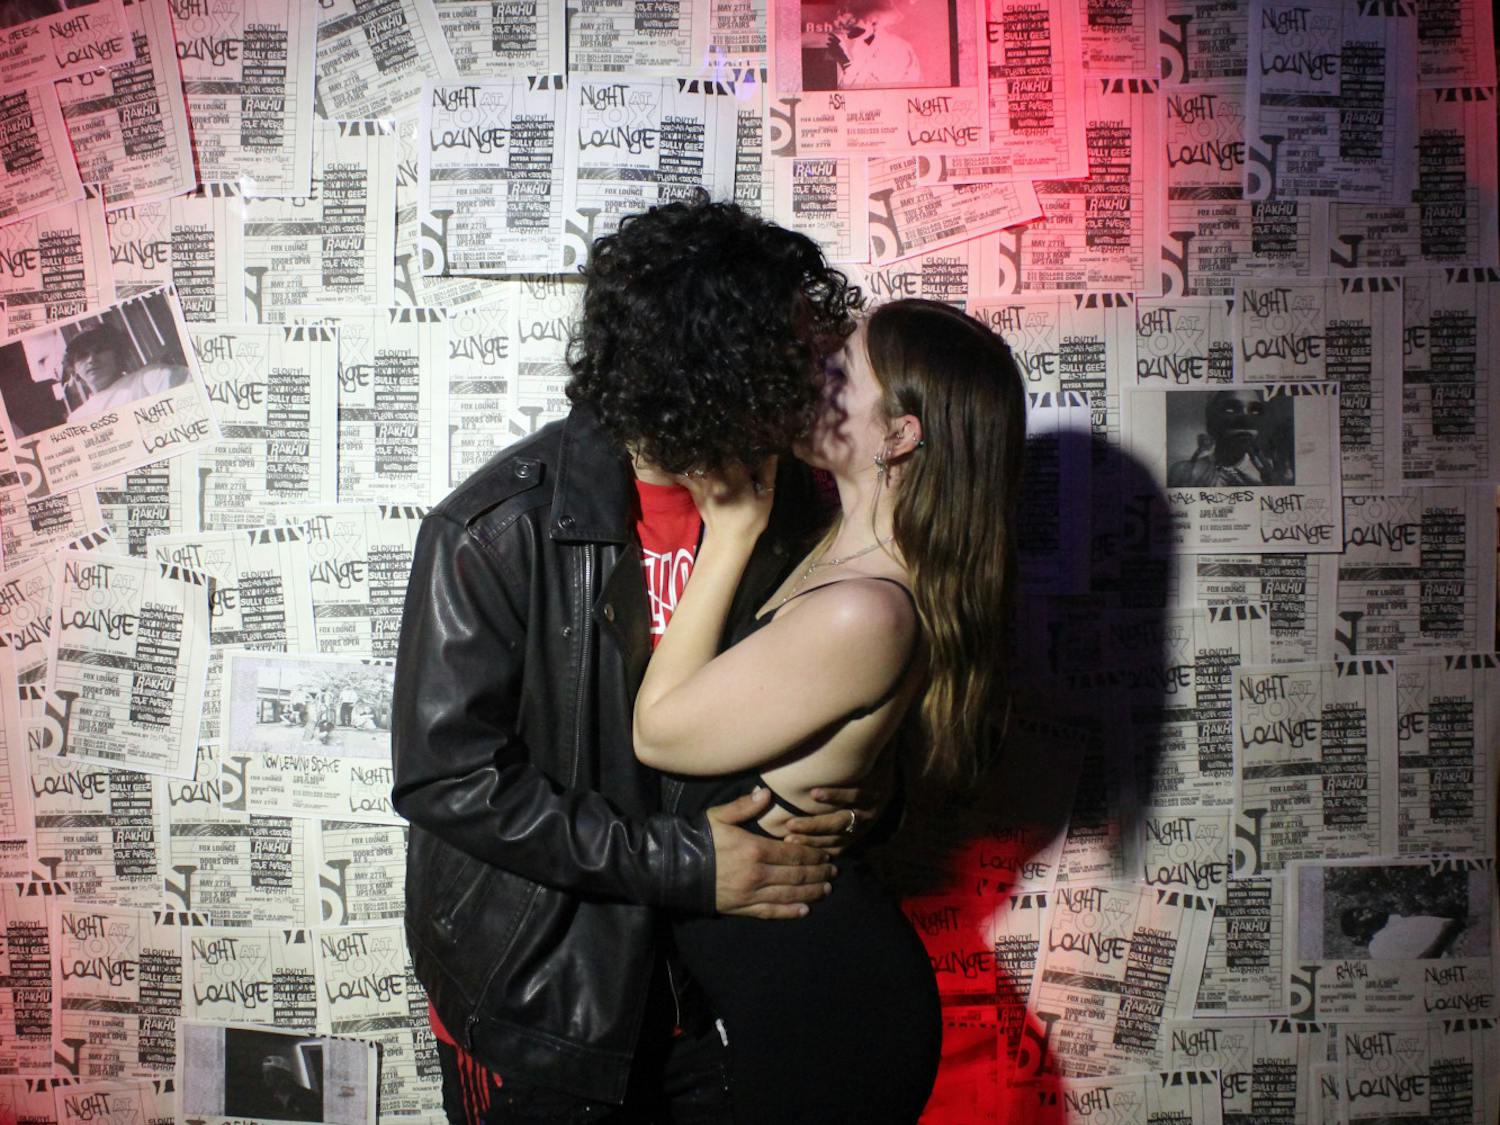 Michael Corio, 20, and Desiree Kirschner, 20, kiss during the Night at Fox Lounge event Friday, May 27, 2022. 